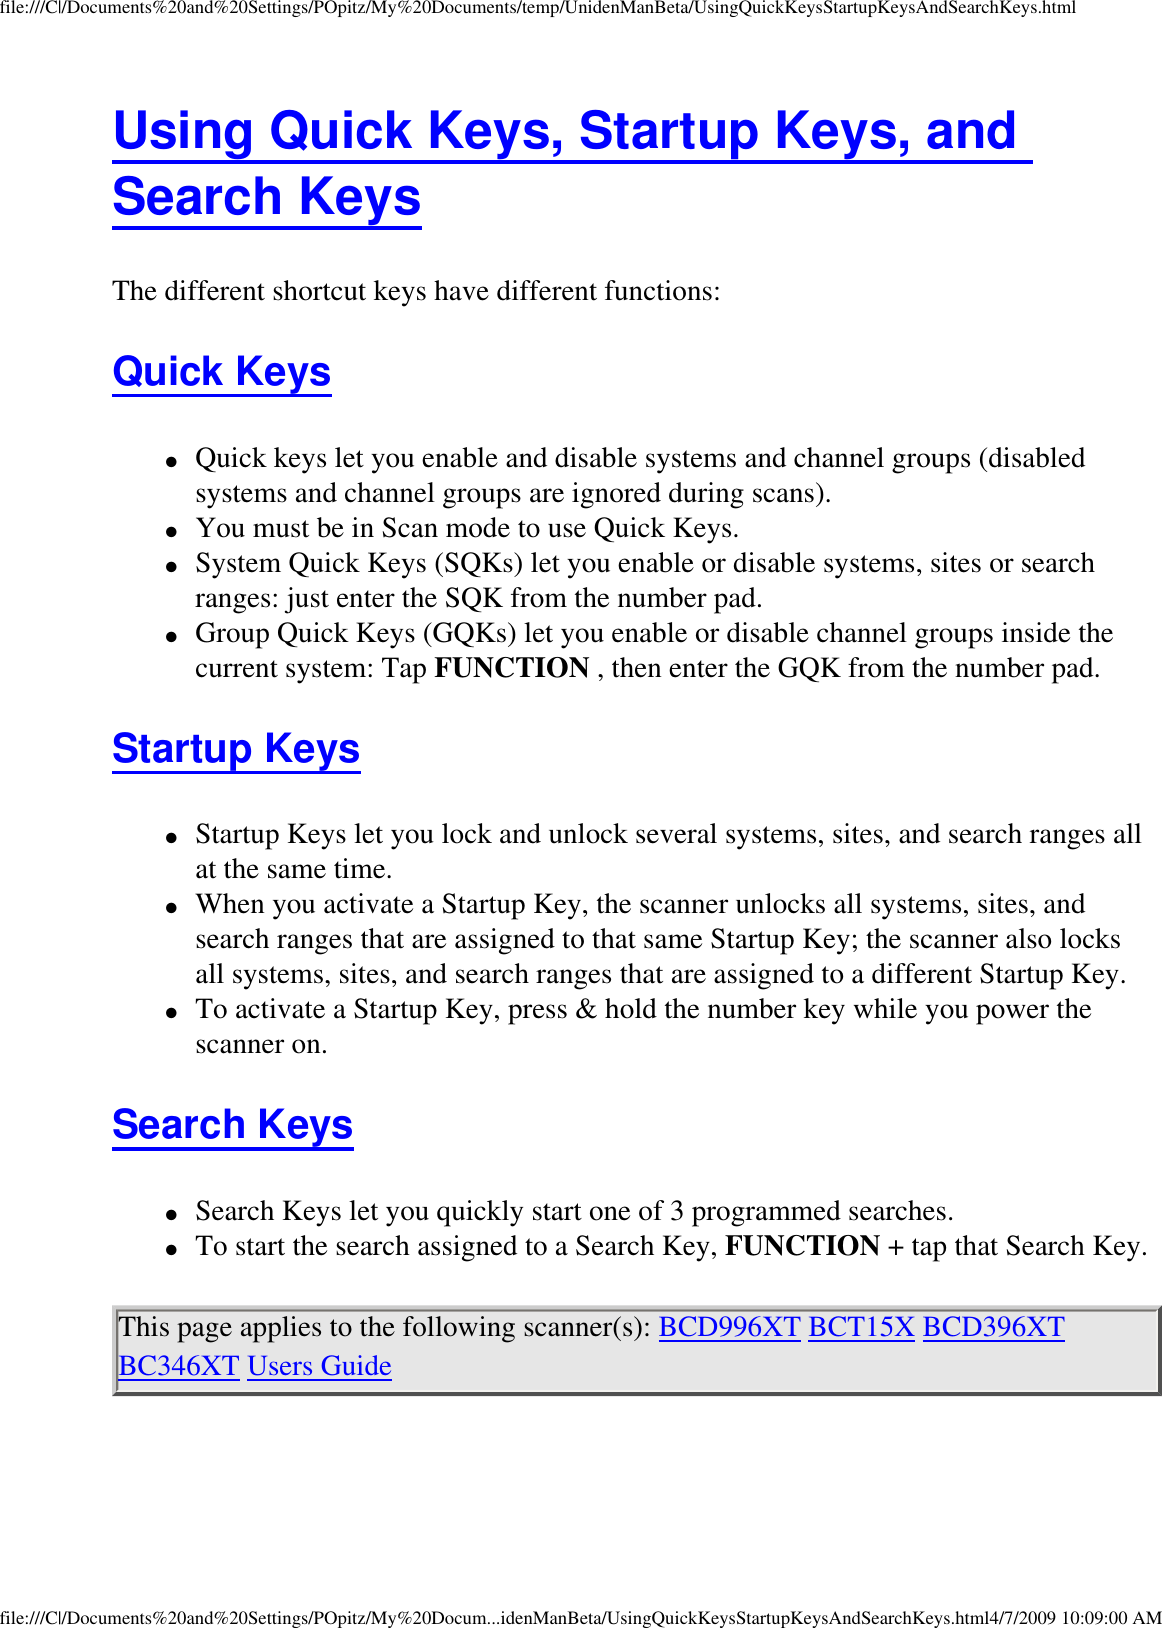 file:///C|/Documents%20and%20Settings/POpitz/My%20Documents/temp/UnidenManBeta/UsingQuickKeysStartupKeysAndSearchKeys.htmlUsing Quick Keys, Startup Keys, and Search Keys The different shortcut keys have different functions: Quick Keys ●     Quick keys let you enable and disable systems and channel groups (disabled systems and channel groups are ignored during scans). ●     You must be in Scan mode to use Quick Keys. ●     System Quick Keys (SQKs) let you enable or disable systems, sites or search ranges: just enter the SQK from the number pad. ●     Group Quick Keys (GQKs) let you enable or disable channel groups inside the current system: Tap FUNCTION , then enter the GQK from the number pad. Startup Keys ●     Startup Keys let you lock and unlock several systems, sites, and search ranges all at the same time. ●     When you activate a Startup Key, the scanner unlocks all systems, sites, and search ranges that are assigned to that same Startup Key; the scanner also locks all systems, sites, and search ranges that are assigned to a different Startup Key. ●     To activate a Startup Key, press &amp; hold the number key while you power the scanner on. Search Keys ●     Search Keys let you quickly start one of 3 programmed searches. ●     To start the search assigned to a Search Key, FUNCTION + tap that Search Key. This page applies to the following scanner(s): BCD996XT BCT15X BCD396XT BC346XT Users Guide file:///C|/Documents%20and%20Settings/POpitz/My%20Docum...idenManBeta/UsingQuickKeysStartupKeysAndSearchKeys.html4/7/2009 10:09:00 AM